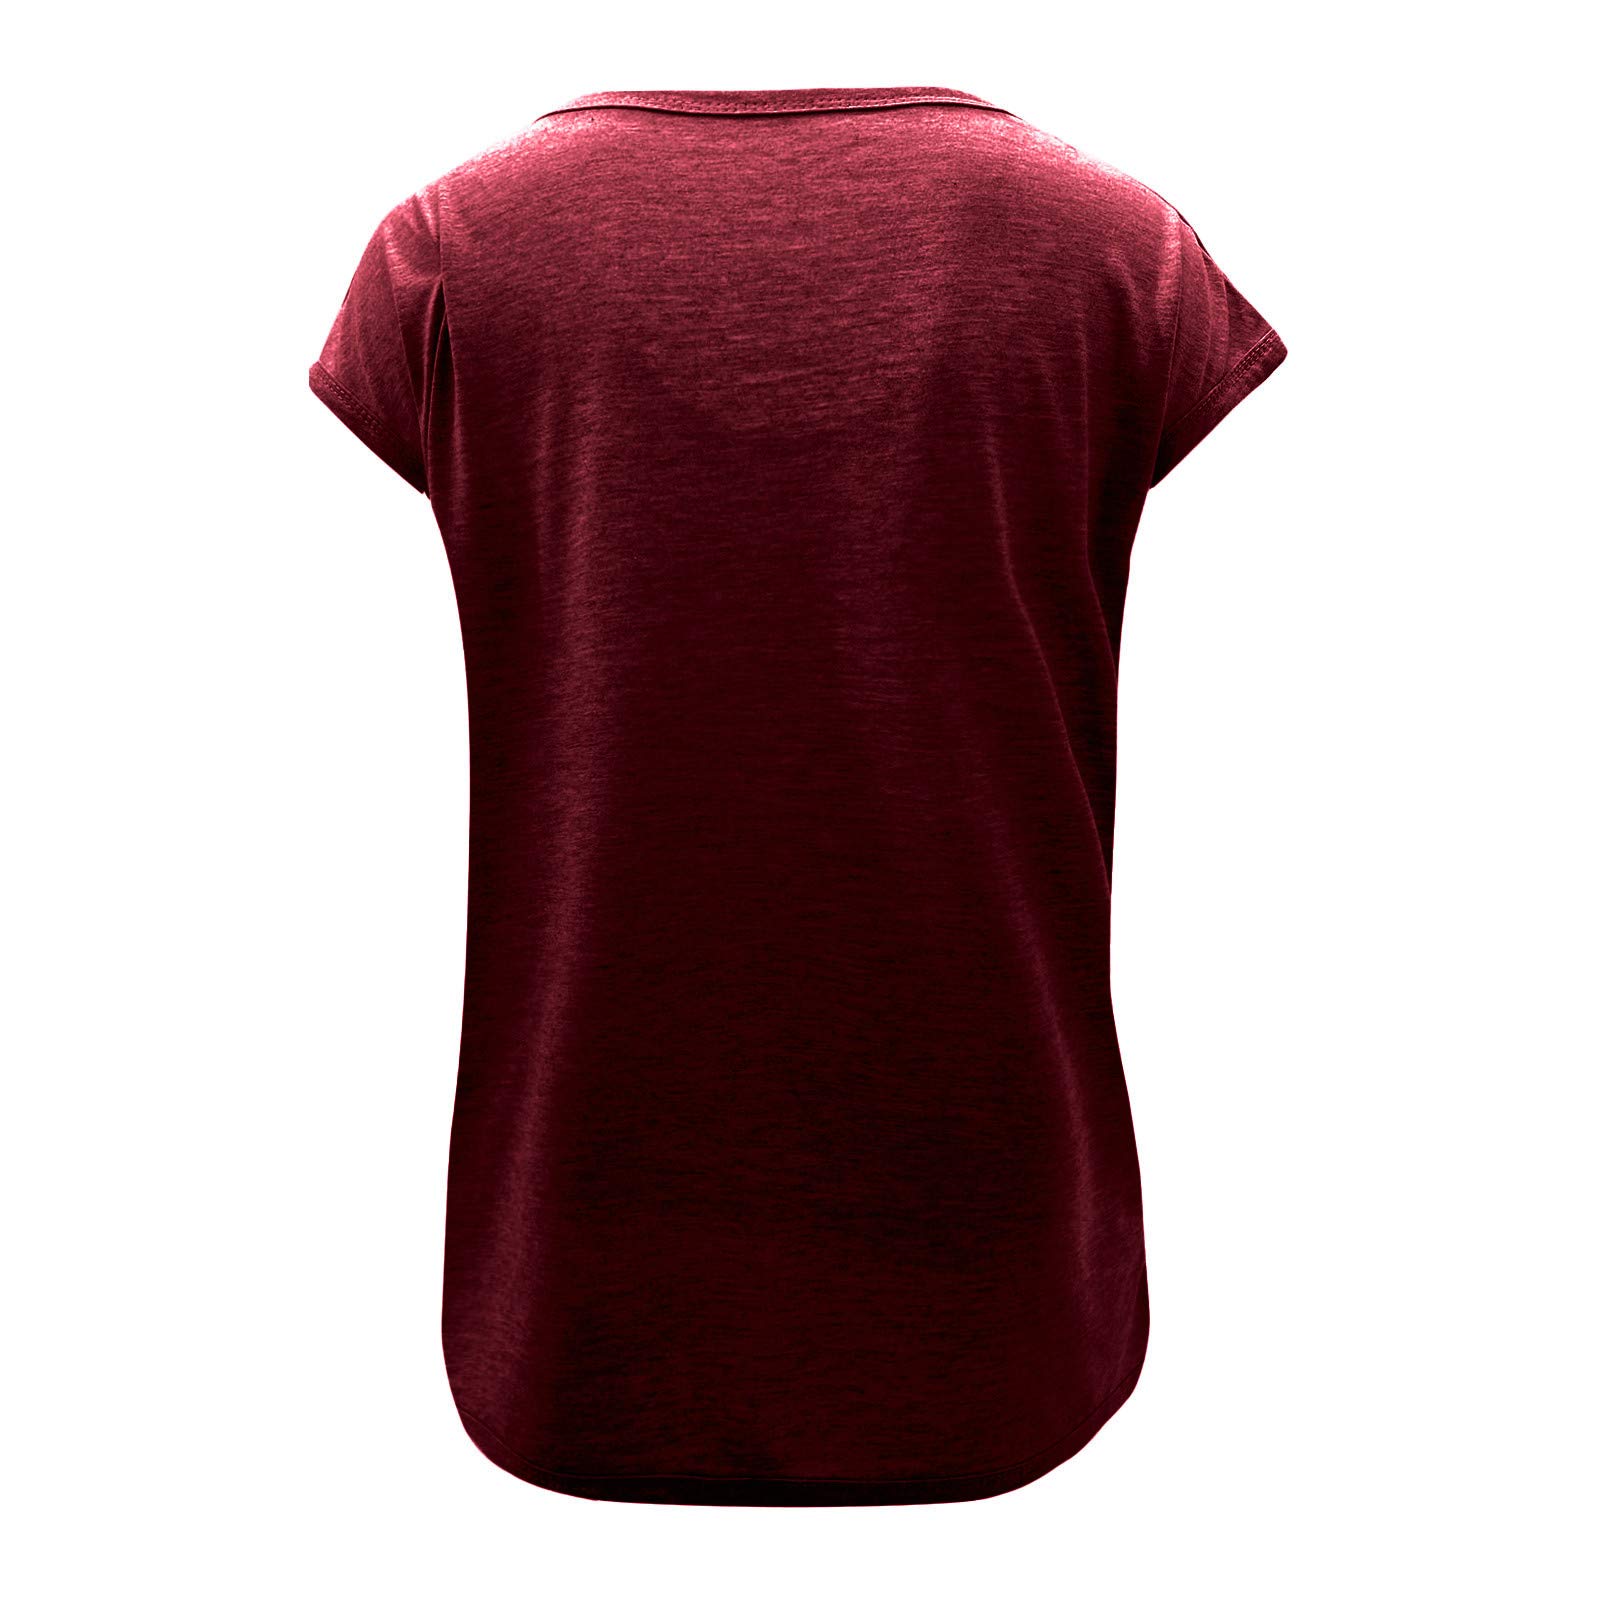 Bravetoshop Women's Short Sleeve Crew Neck Basic T Shirts Casual Blouse Loose Fit Summer Tops (Red,L)